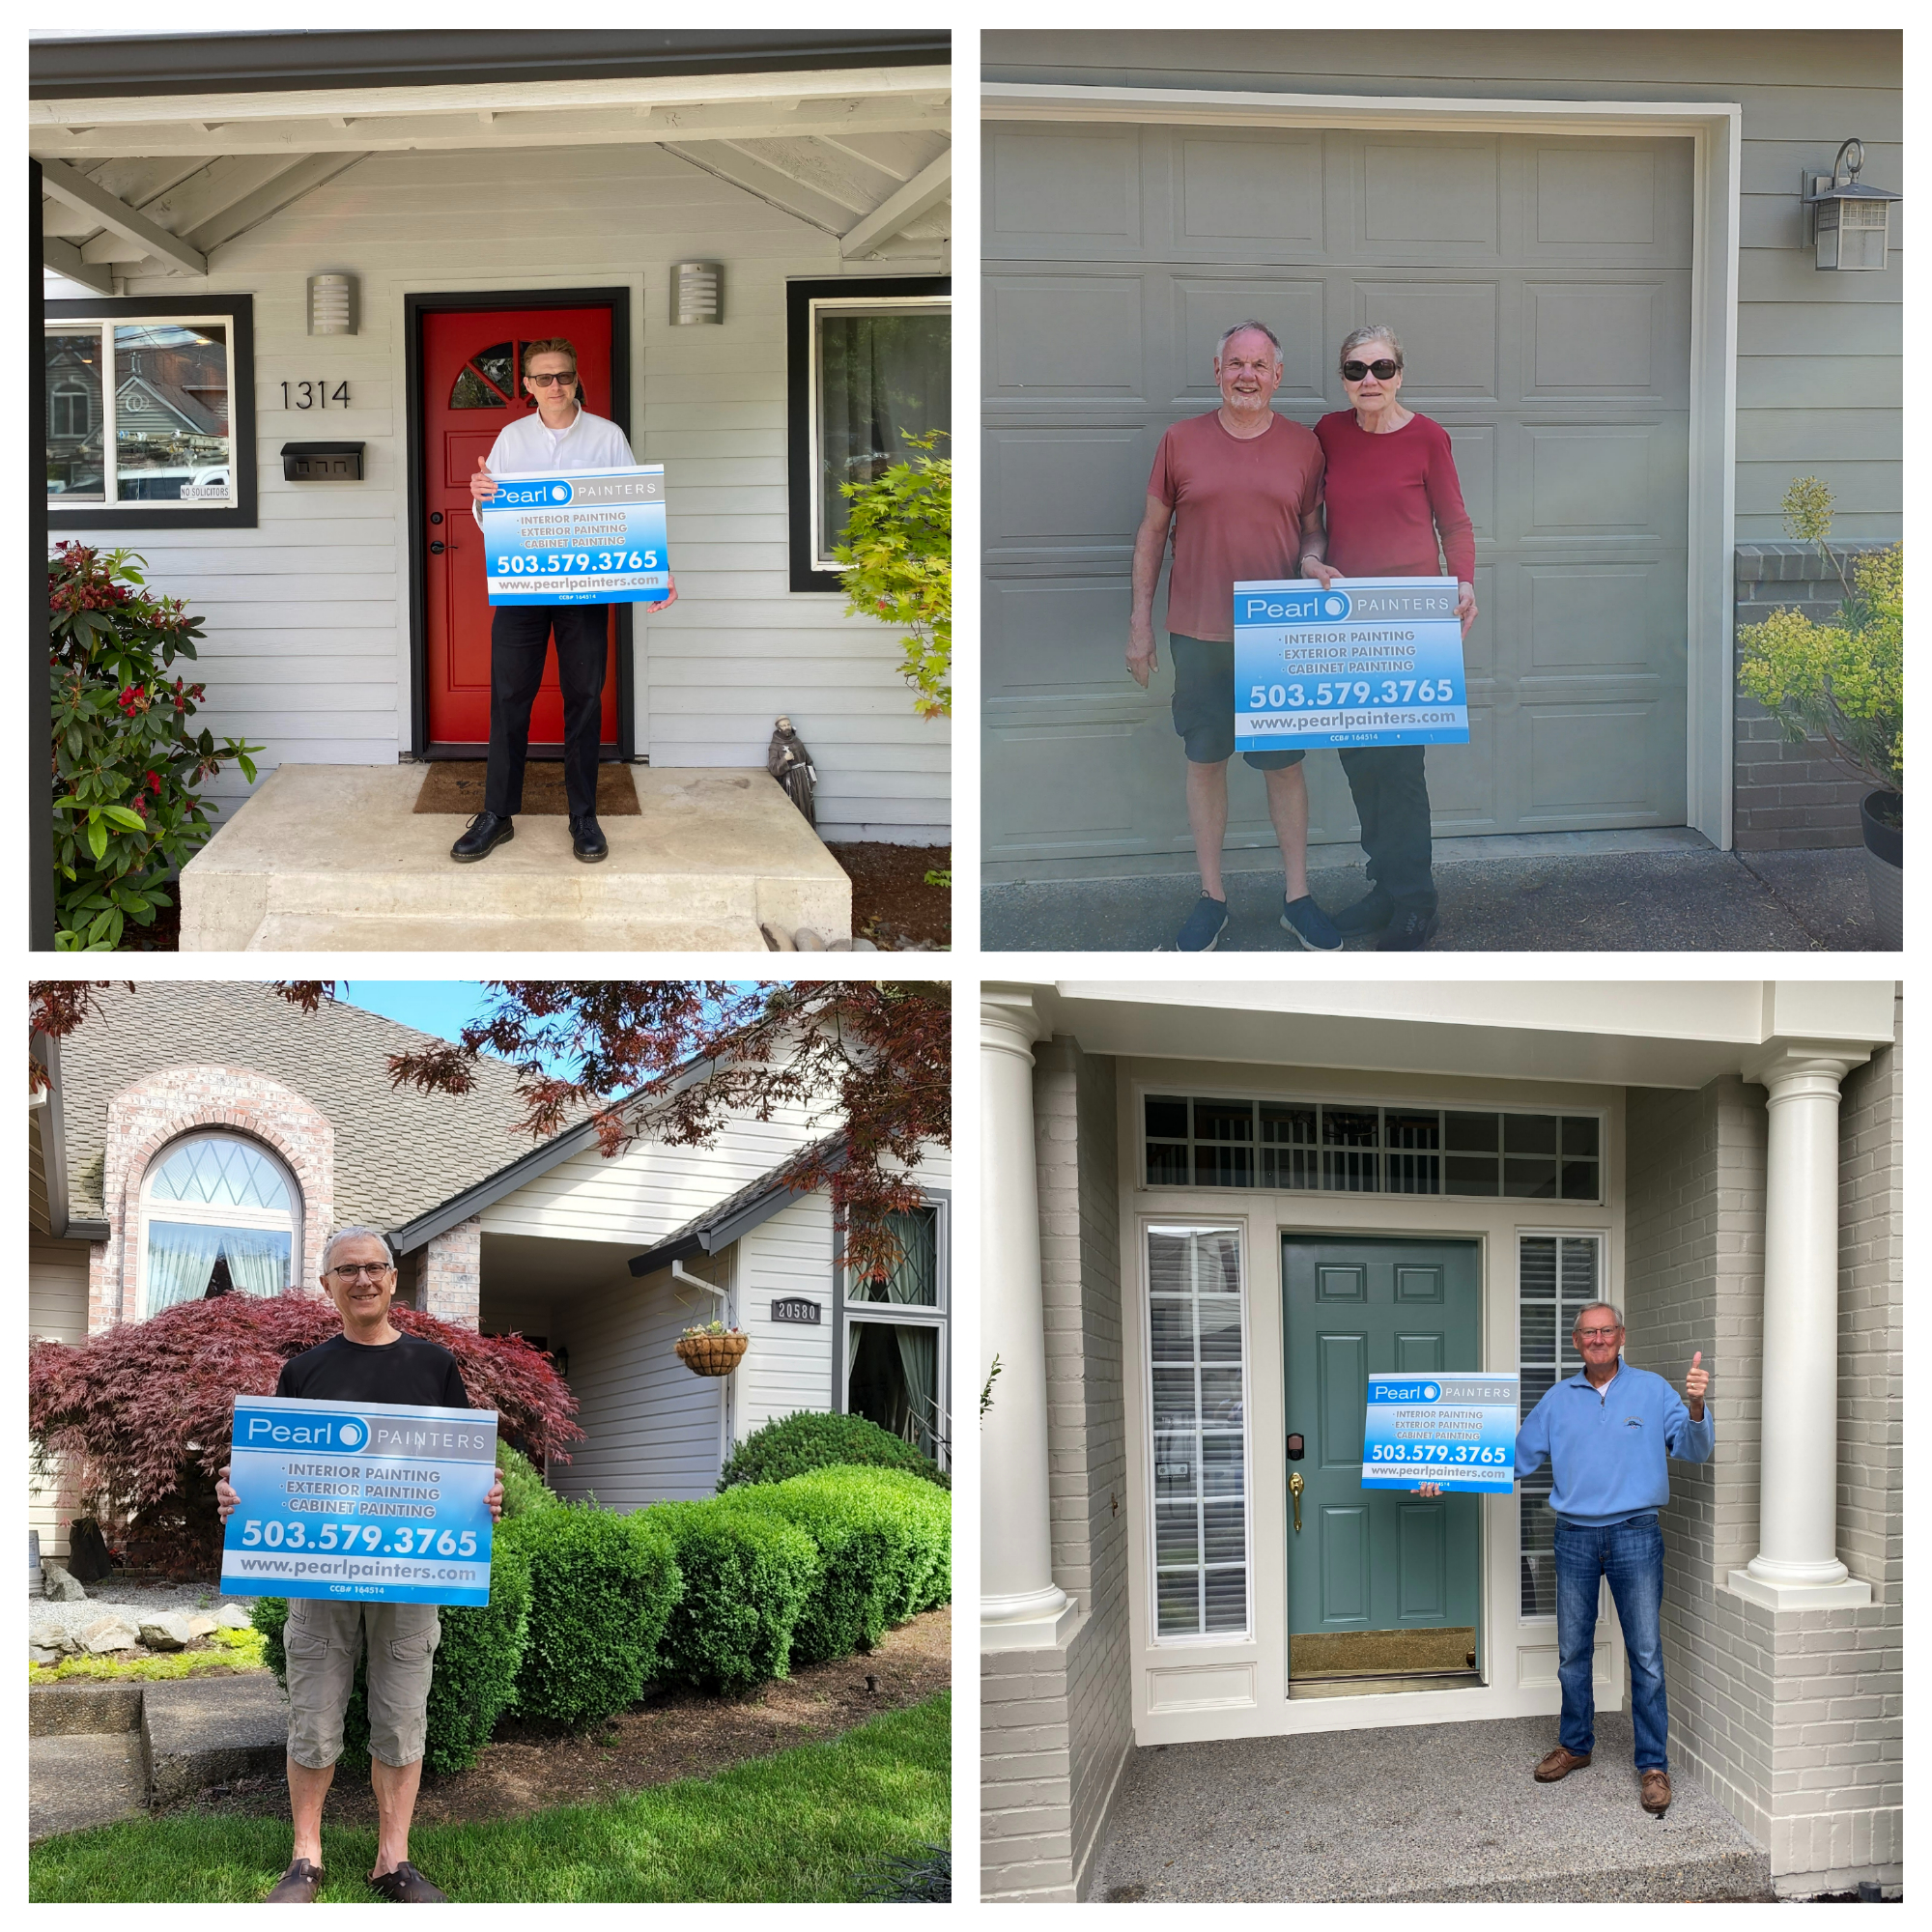 Four people holding signs in front of a secure house.